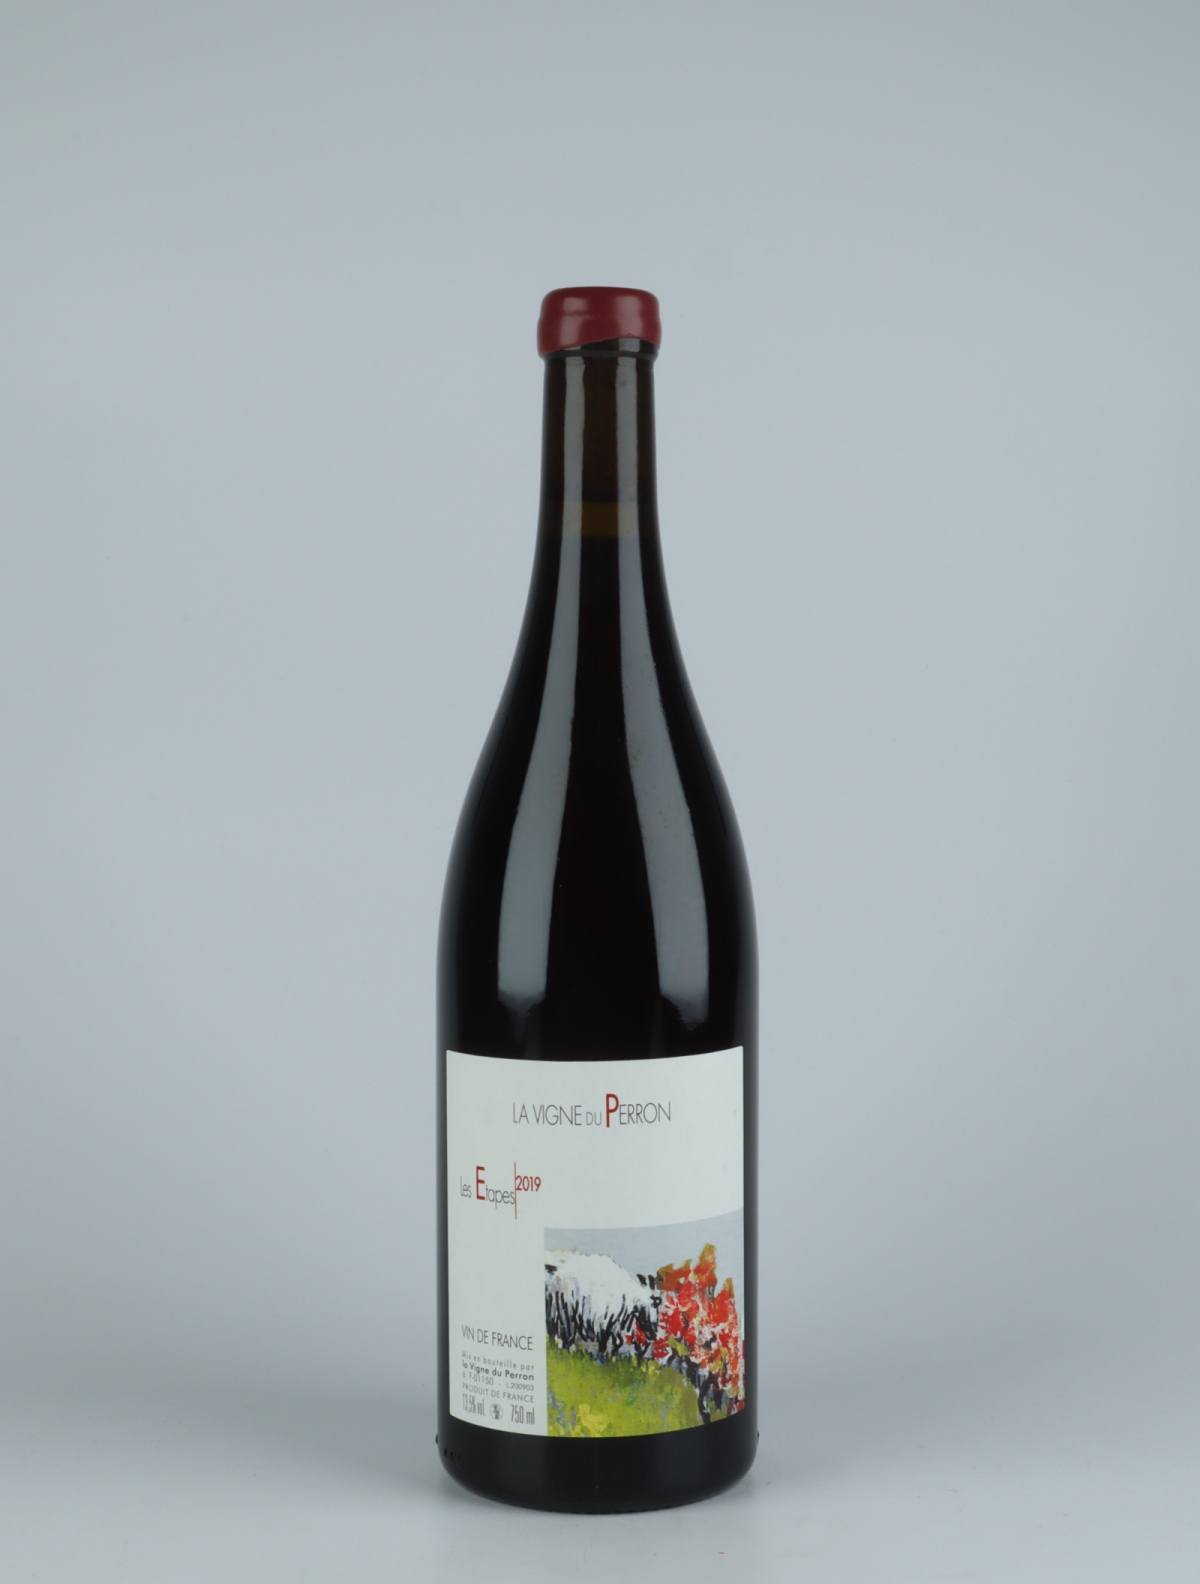 A bottle 2019 Etapes Red wine from Domaine du Perron, Bugey in France